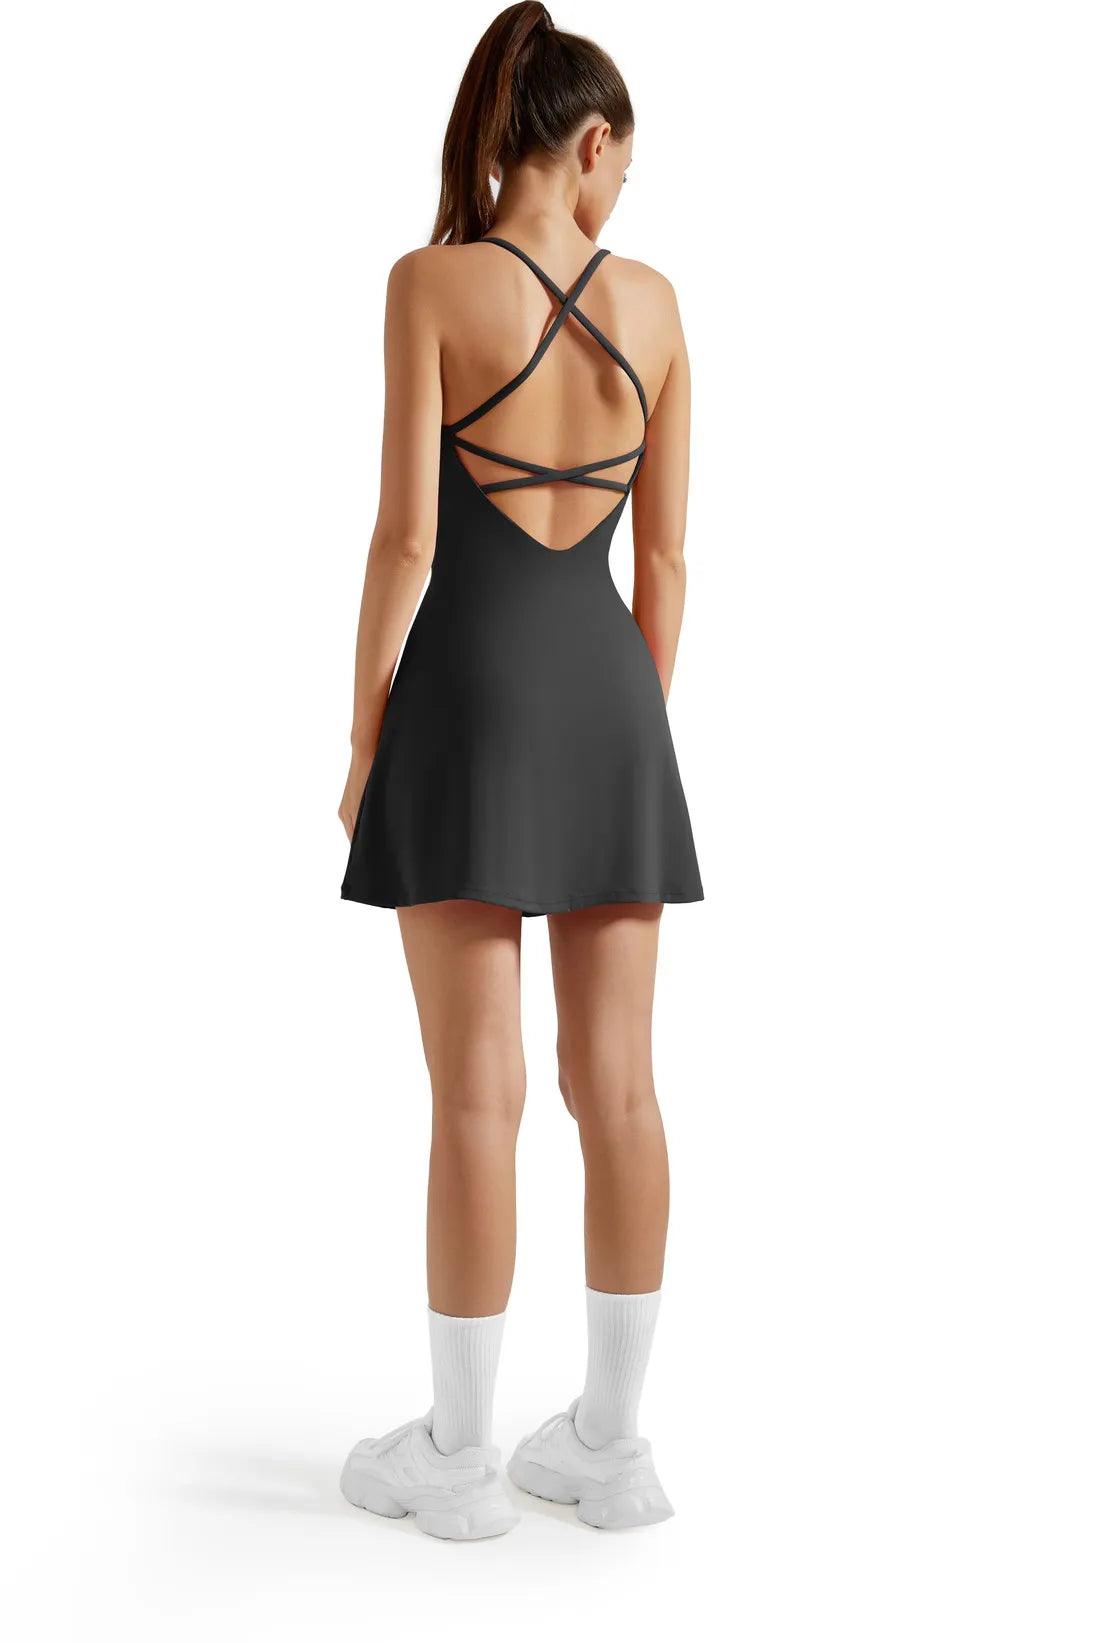 Strappy Backless Dress - SUUKSESS